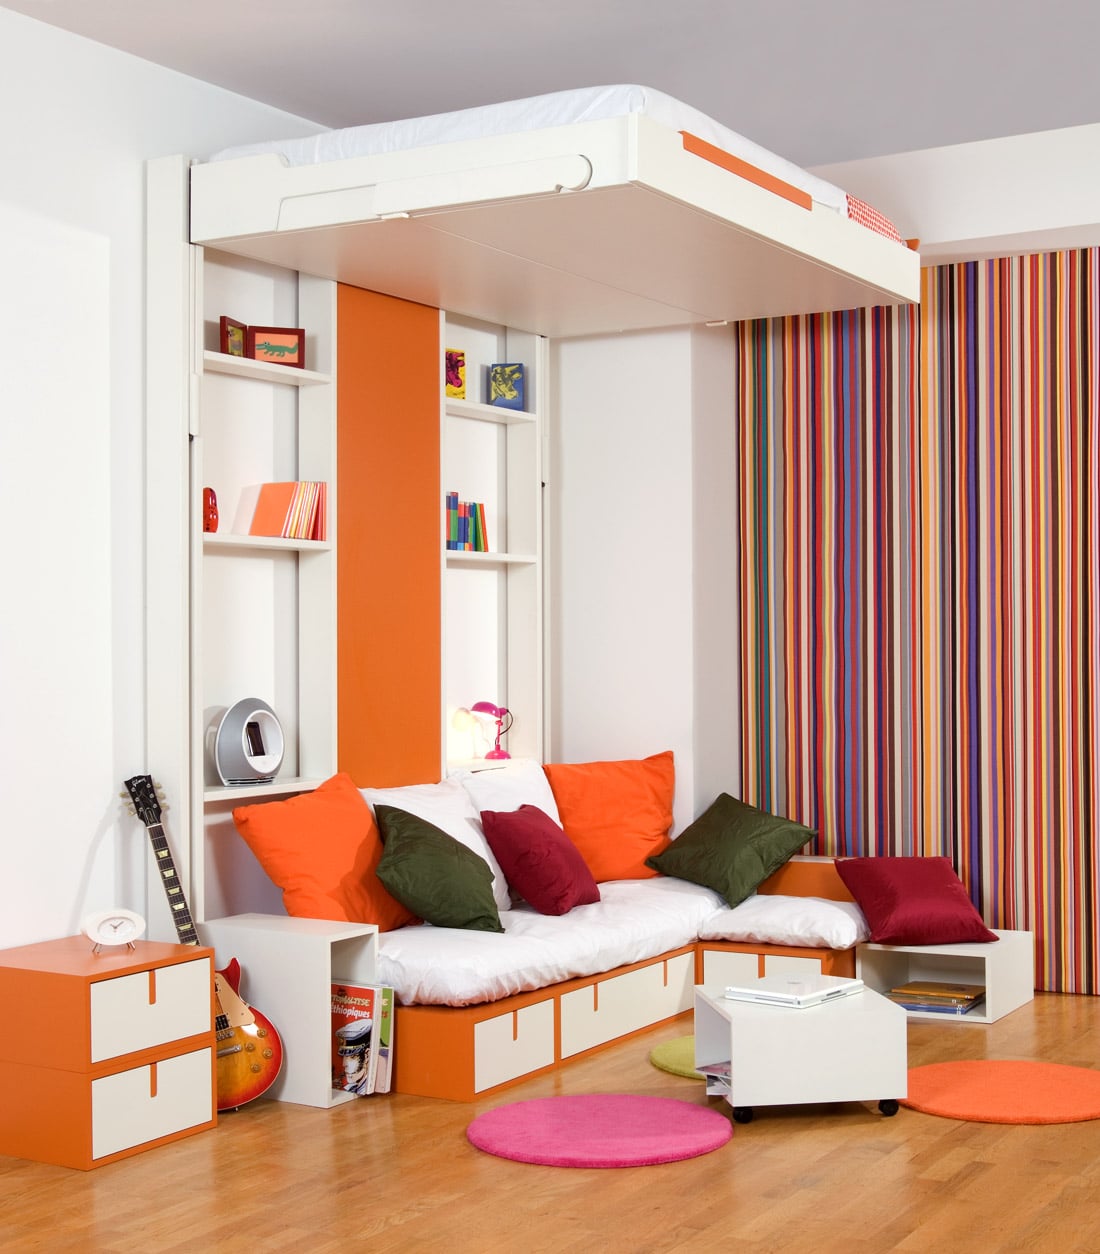 10 Space Saving Furniture For Small Apartments